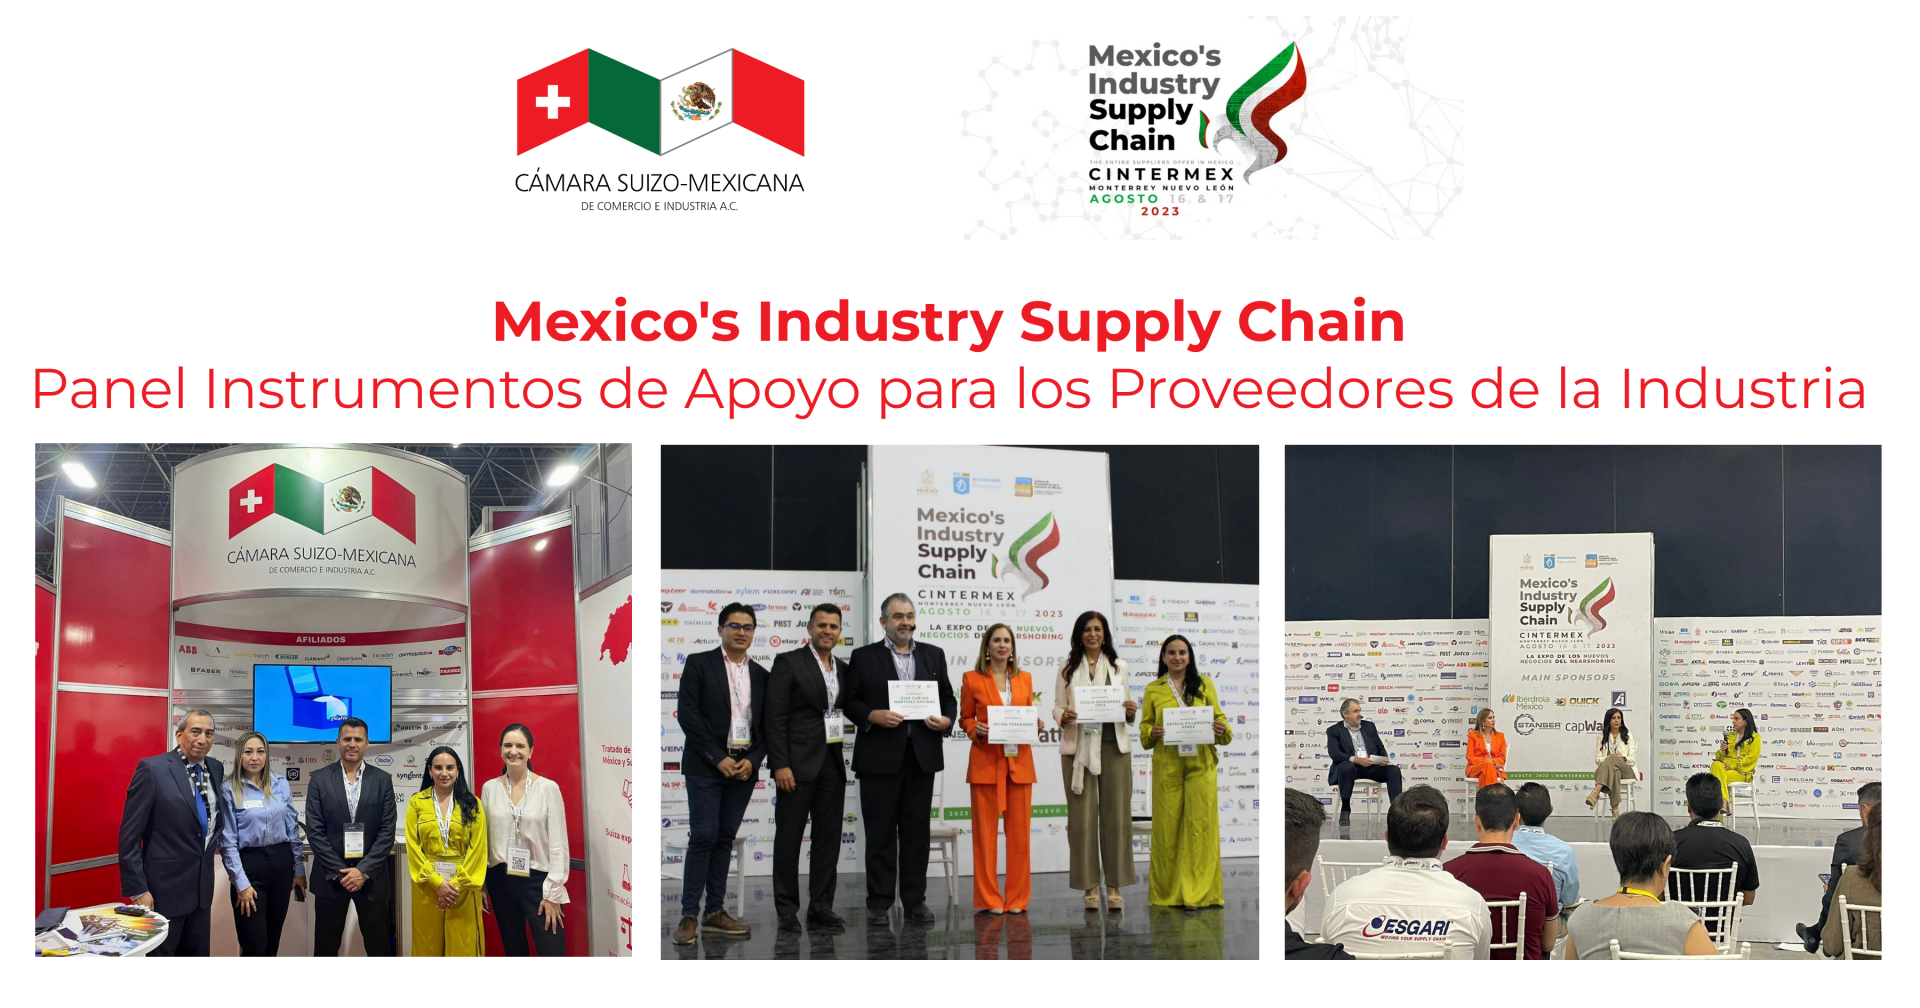 Mexico’s Industry Supply Chain 2023